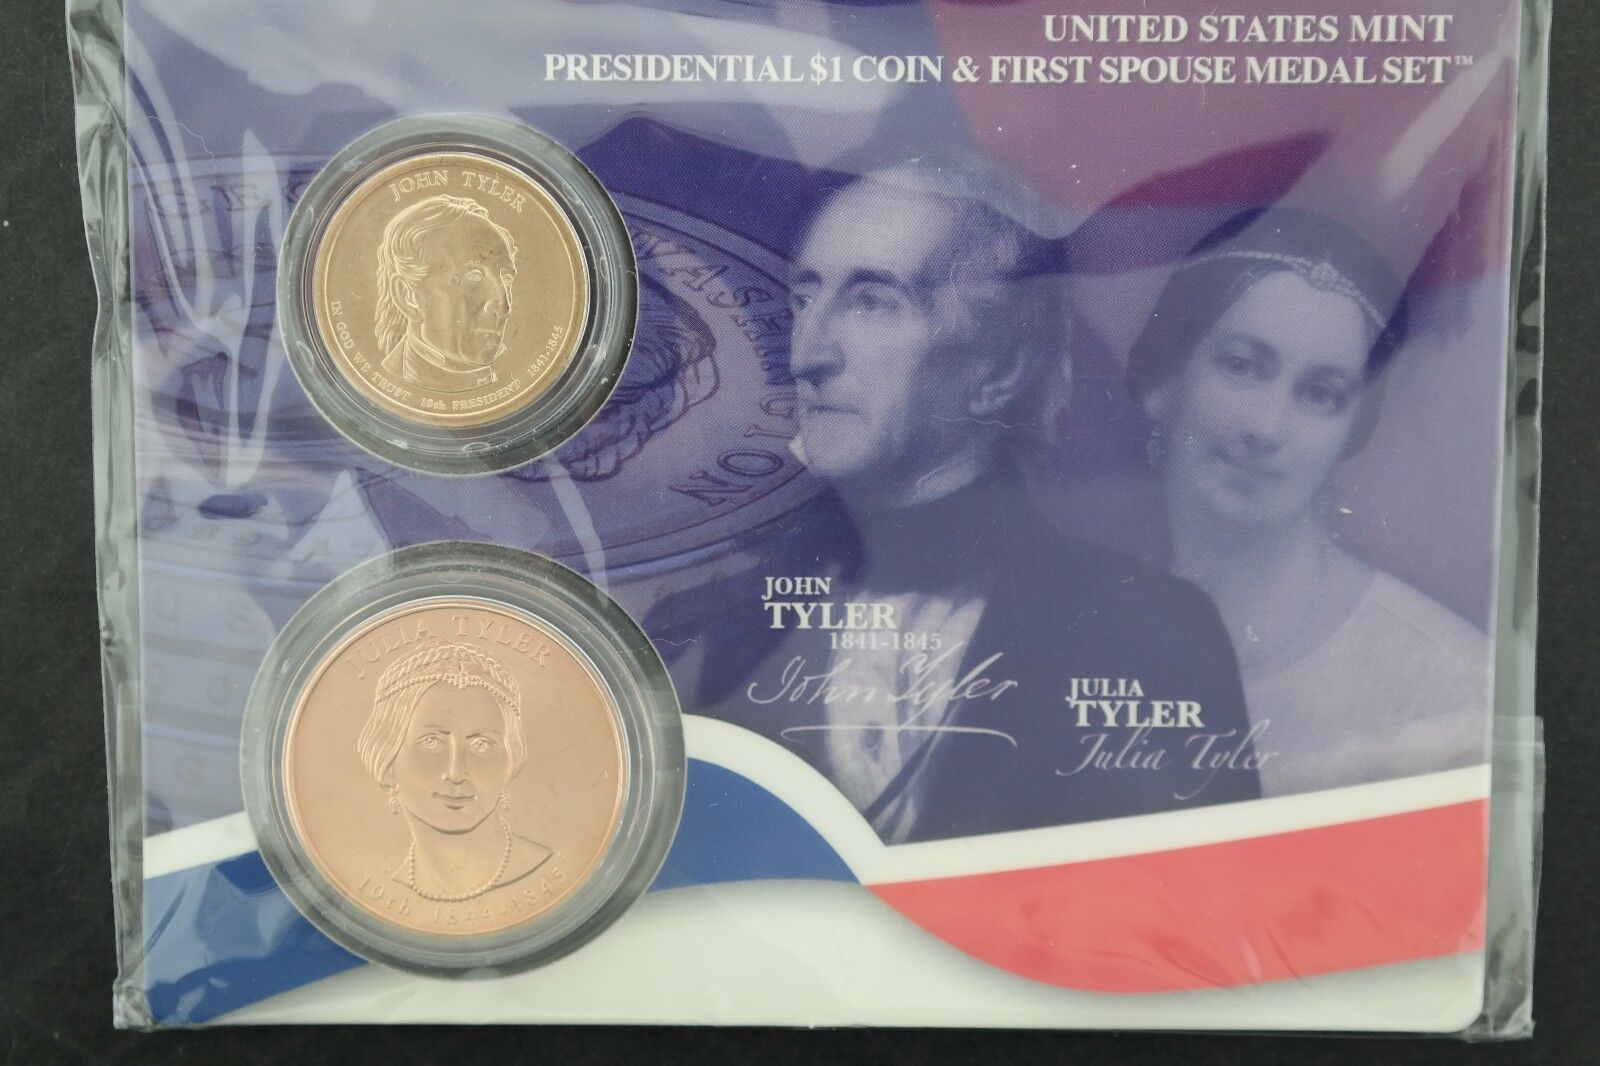 United States Mint Presidential $1 Coin & First Spouse Medal Set - Tyler Без бренда - фотография #5